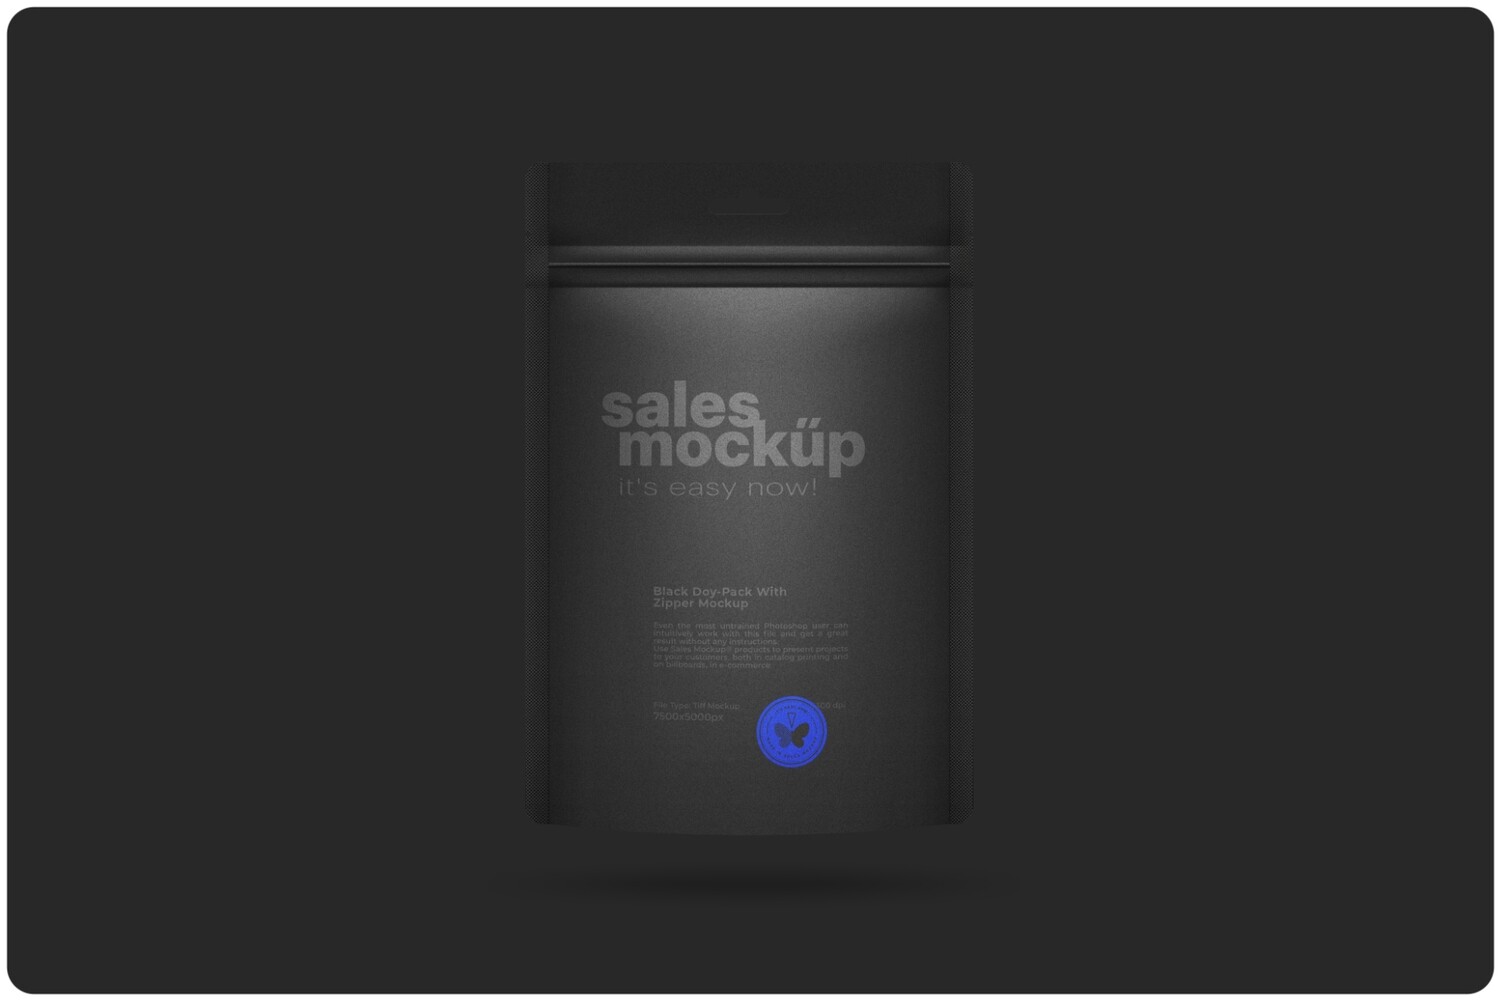 Black Doy-Pack With Zipper Mockup 7x11,8in (20x30cm)